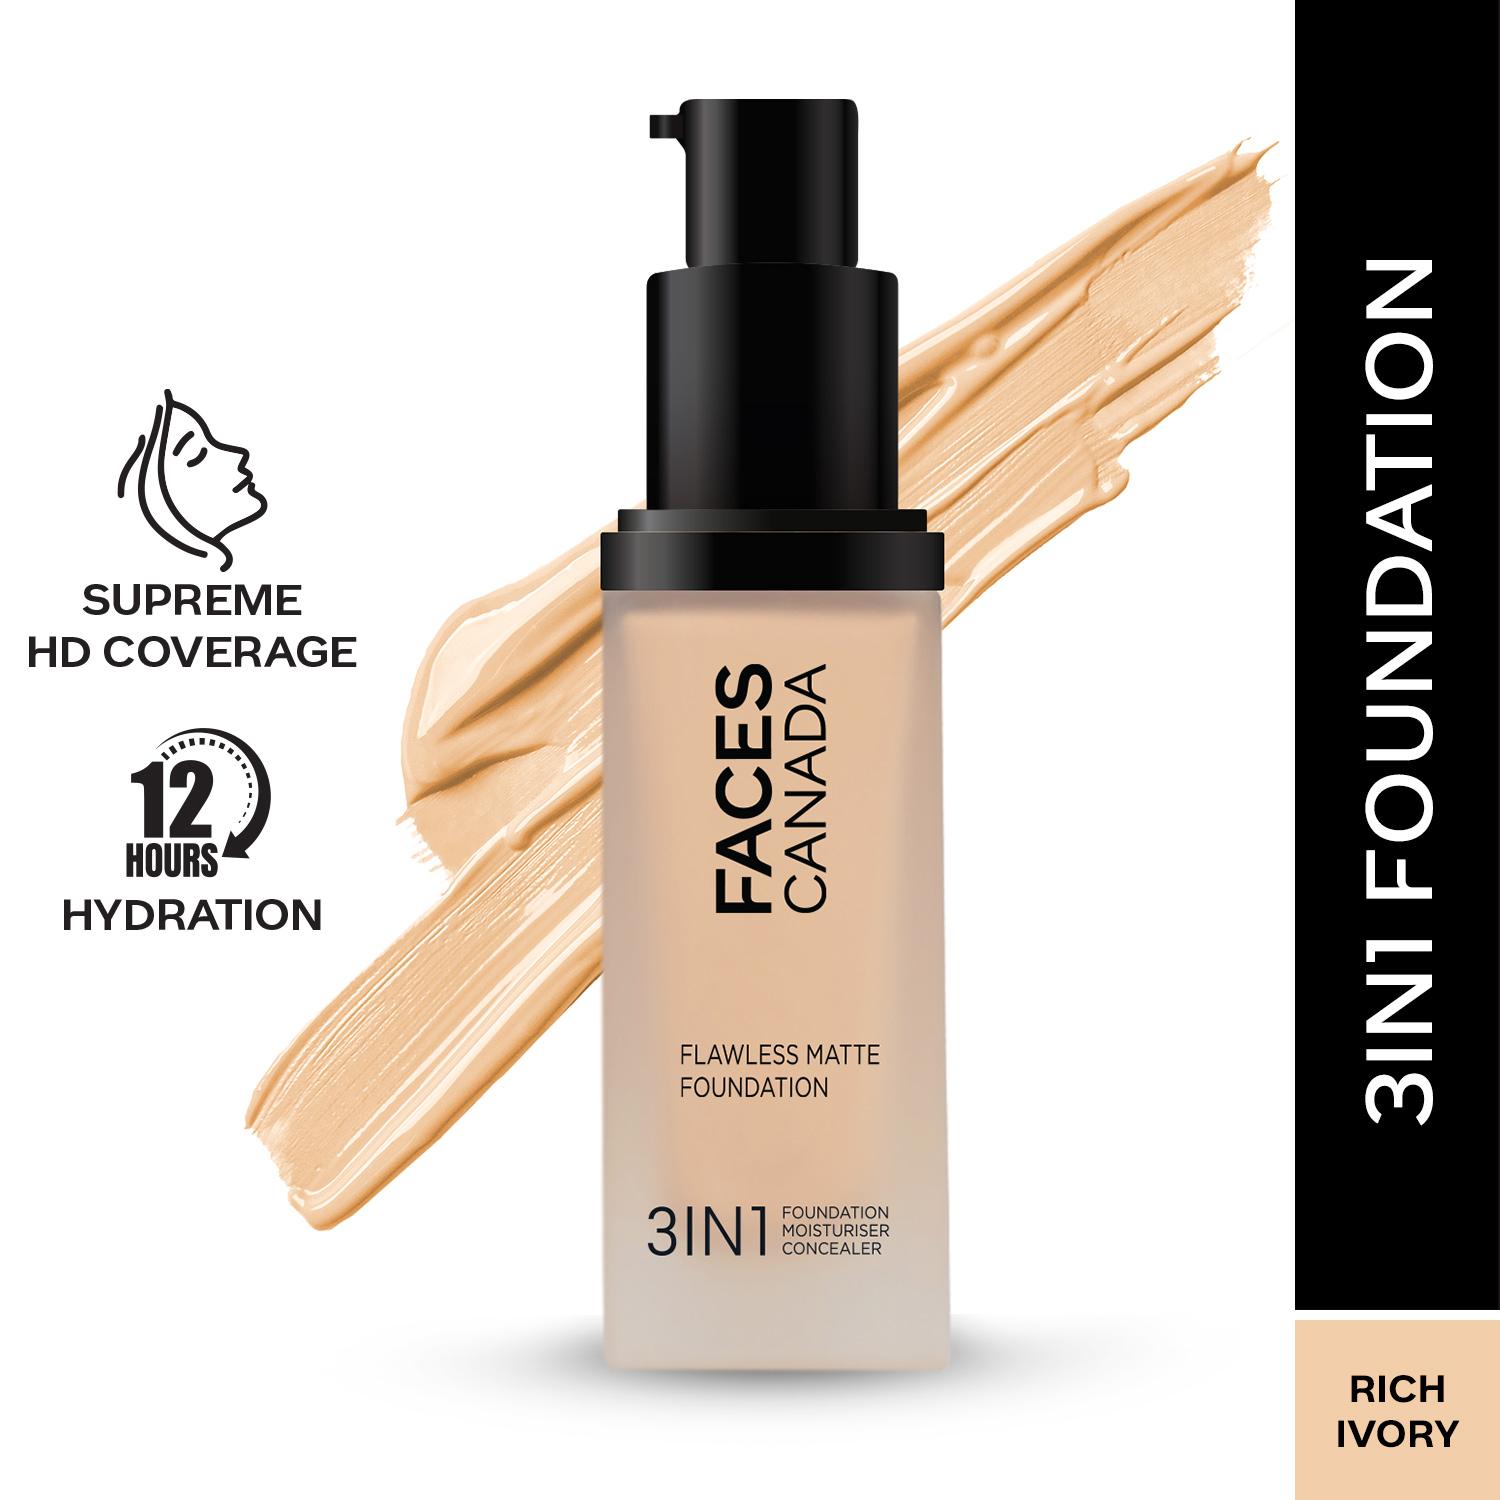 Faces Canada | Faces Canada Flawless Matte Foundation - Rich Ivory 013, 12 HR Hydration + SPF 18 (30 ml)